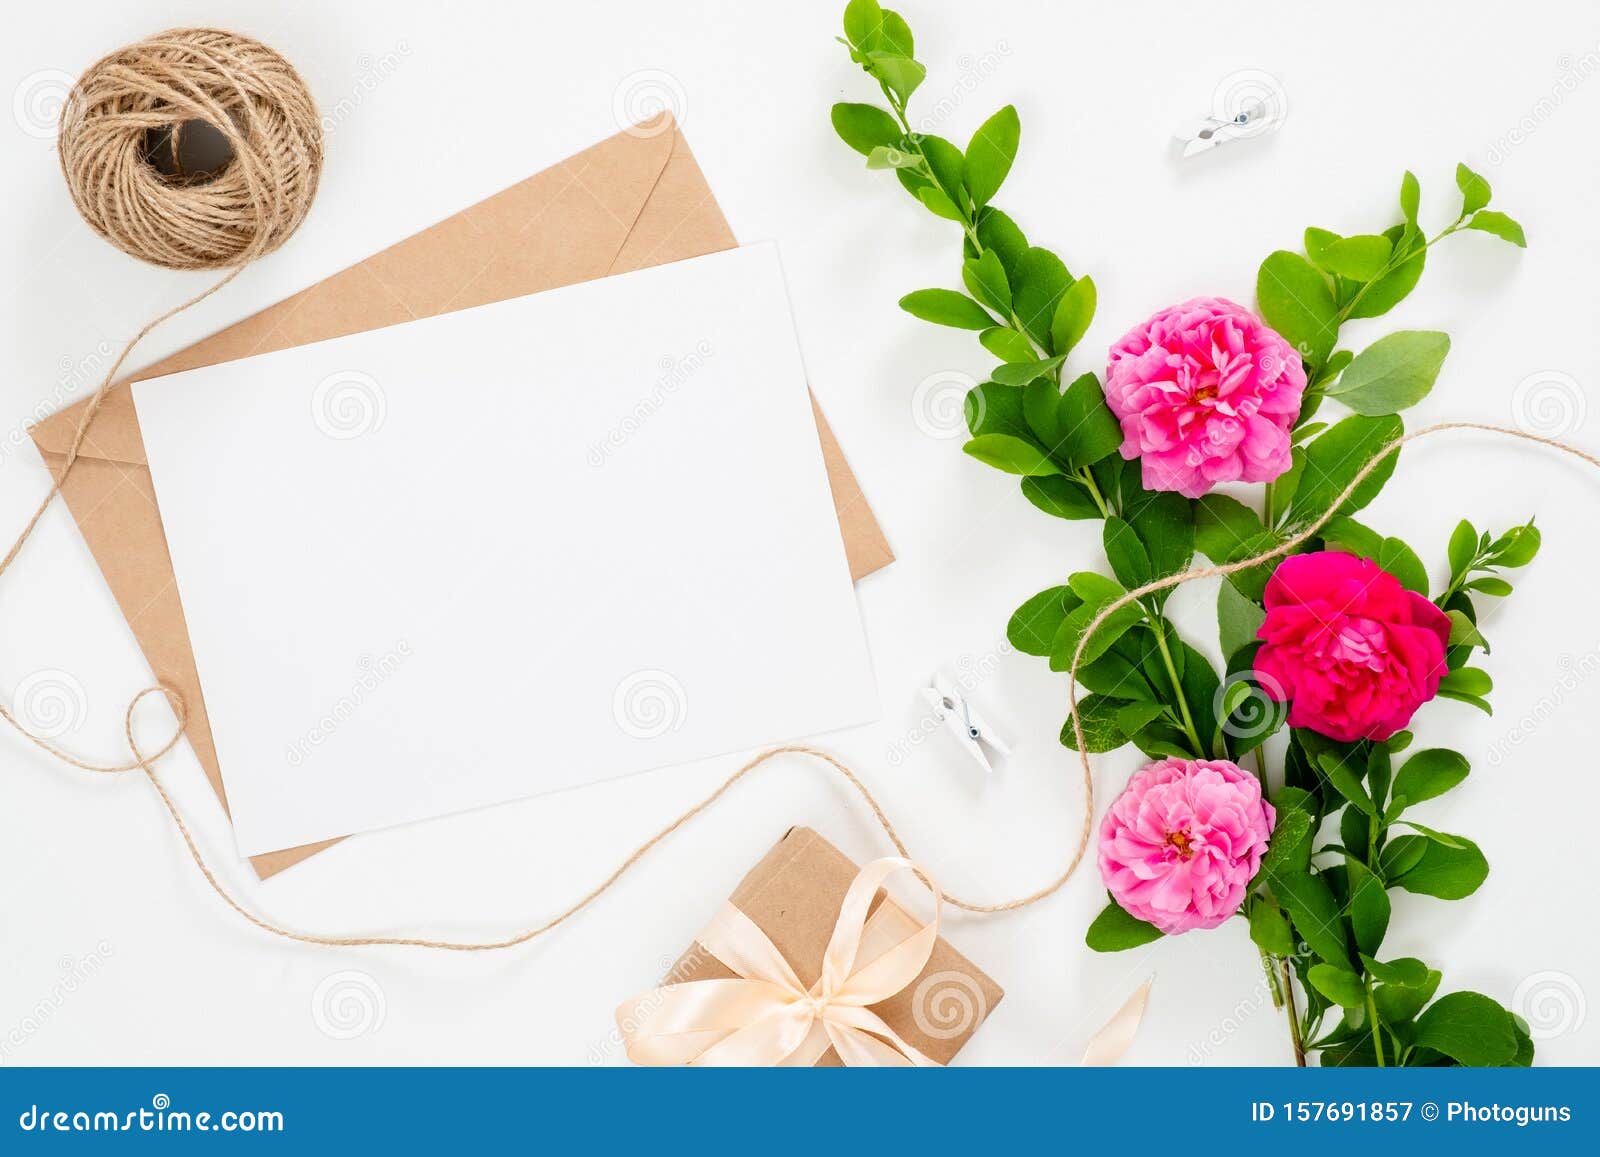 Wedding Invitation Card, Blank Paper Card, Craft Envelope, Ribbon and  Bouquet of Pink Rose Flowers on White Background. Minimal Stock Image -  Image of design, flatlay: 157691857